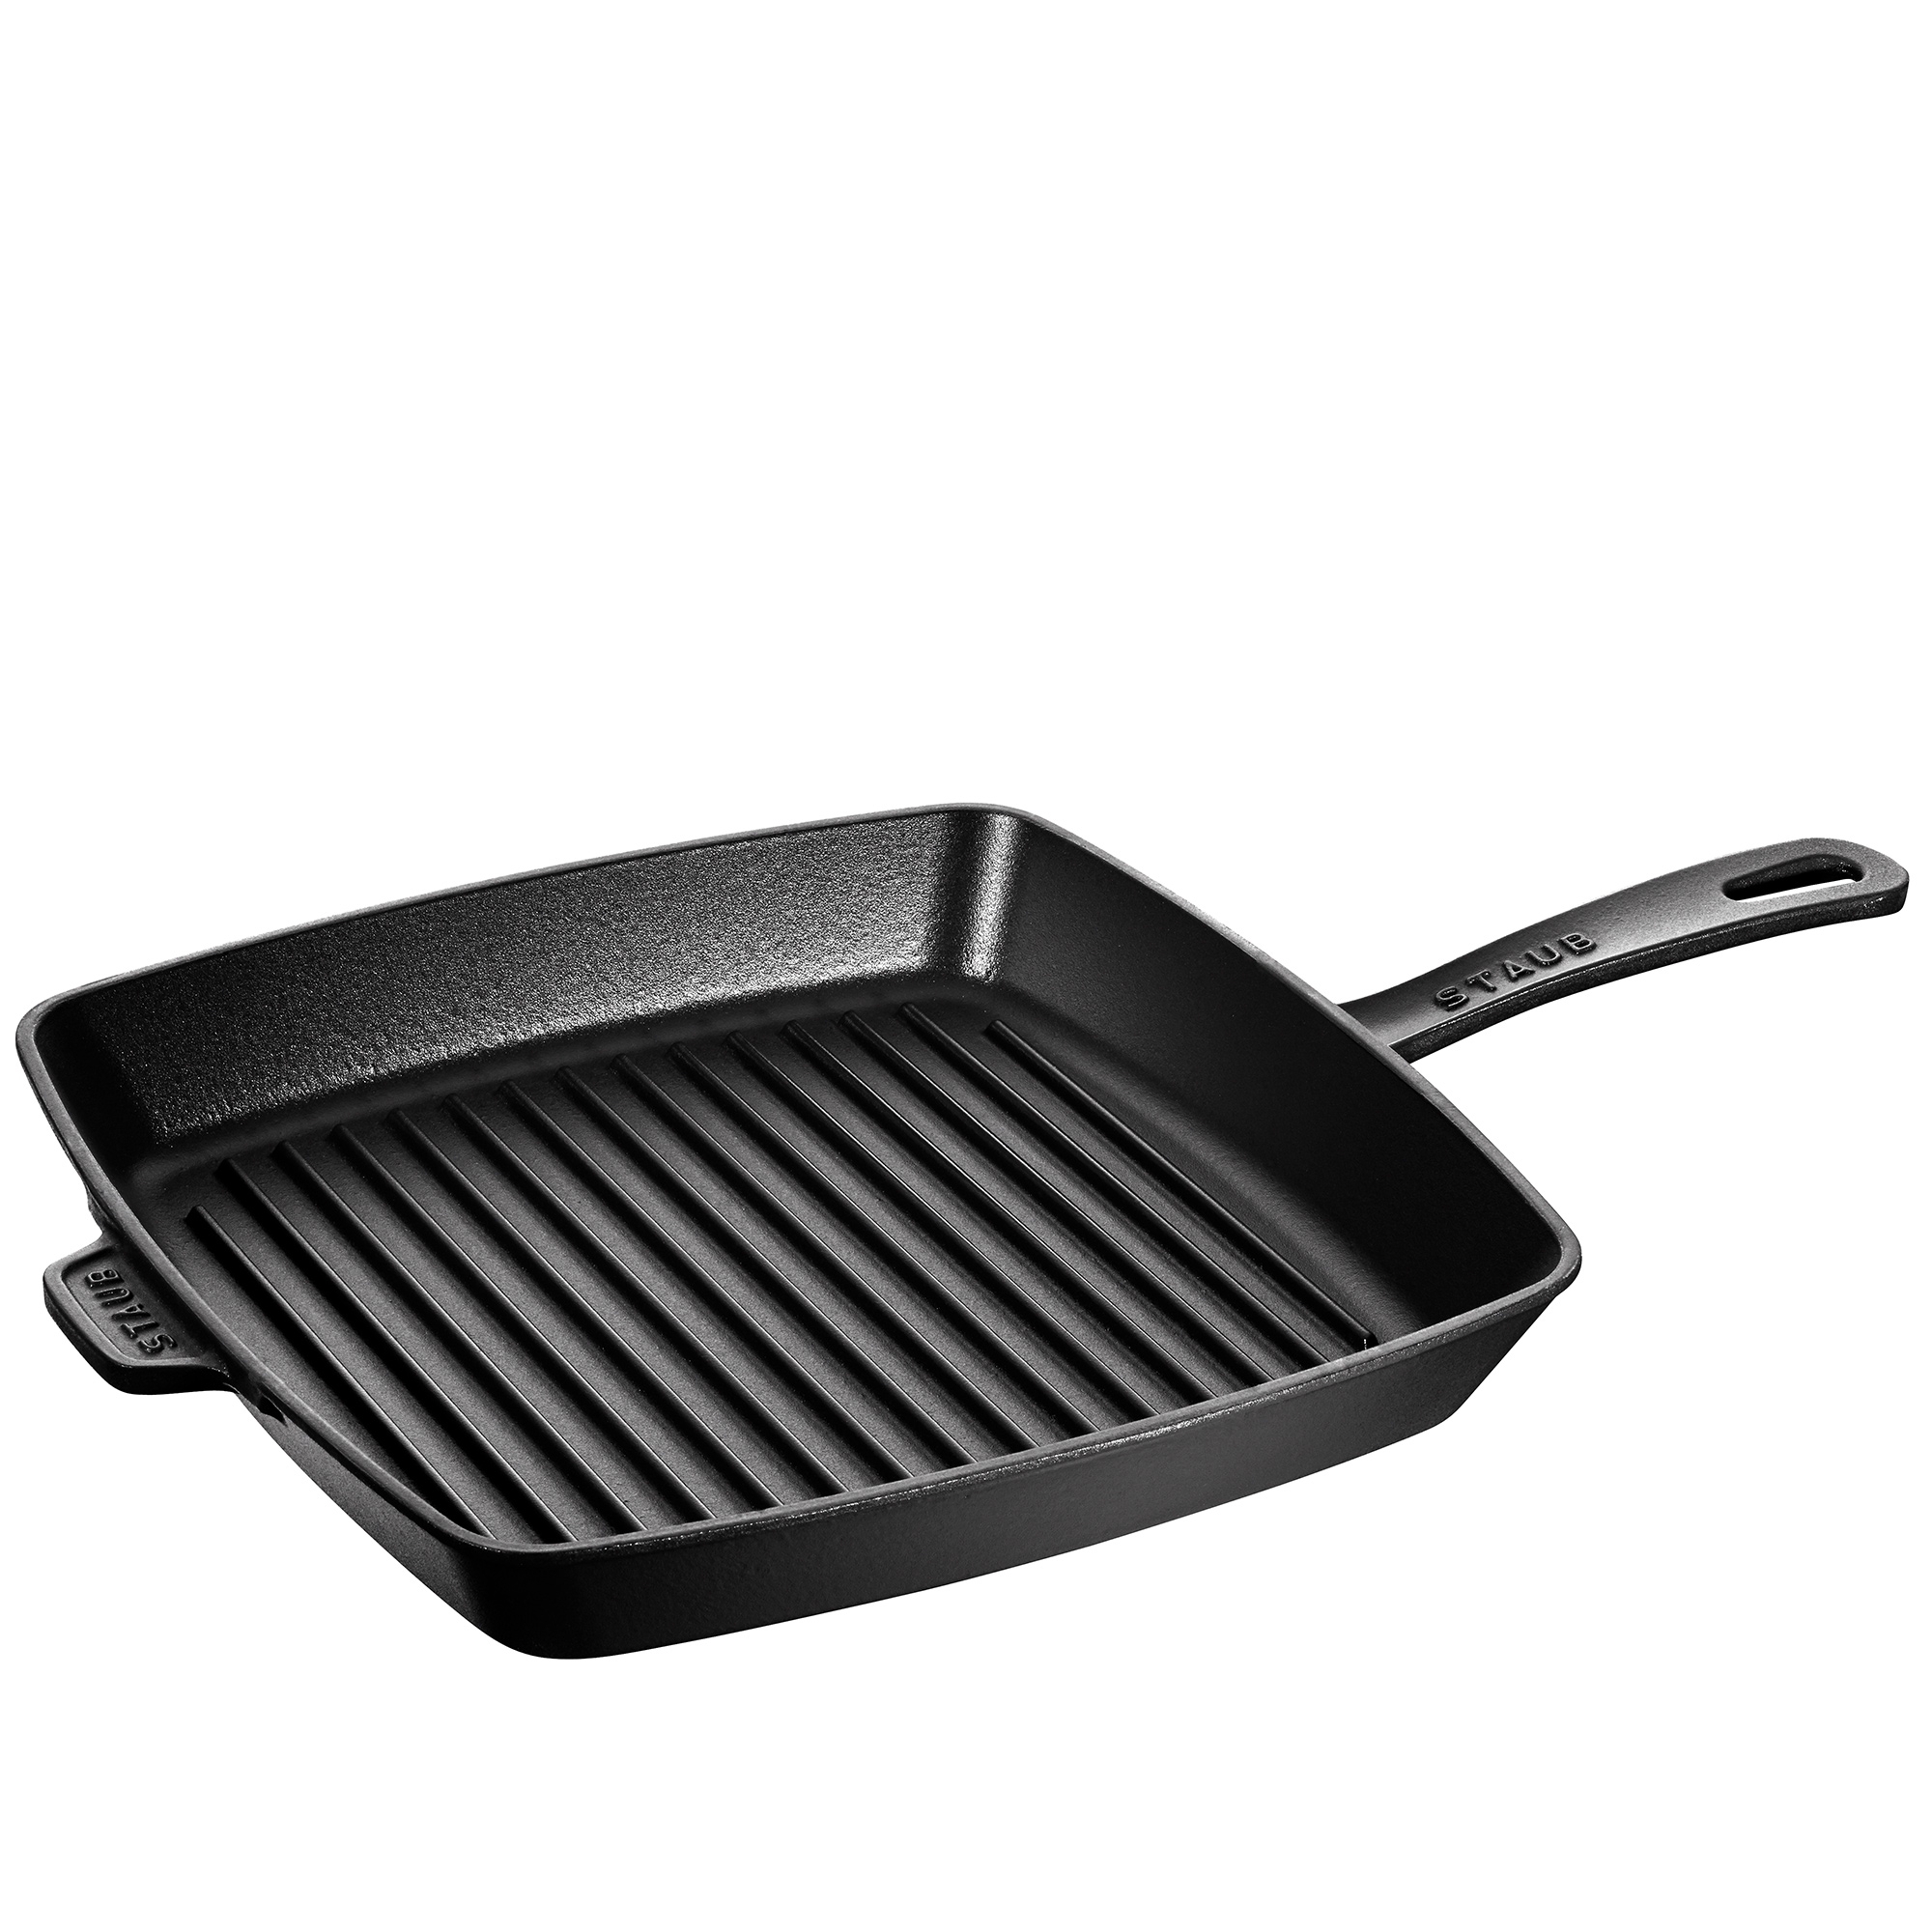 White Enamel Square Cast Iron Grill Pan With Ridges,27cm - Buy White Enamel  Square Cast Iron Grill Pan With Ridges,27cm Product on